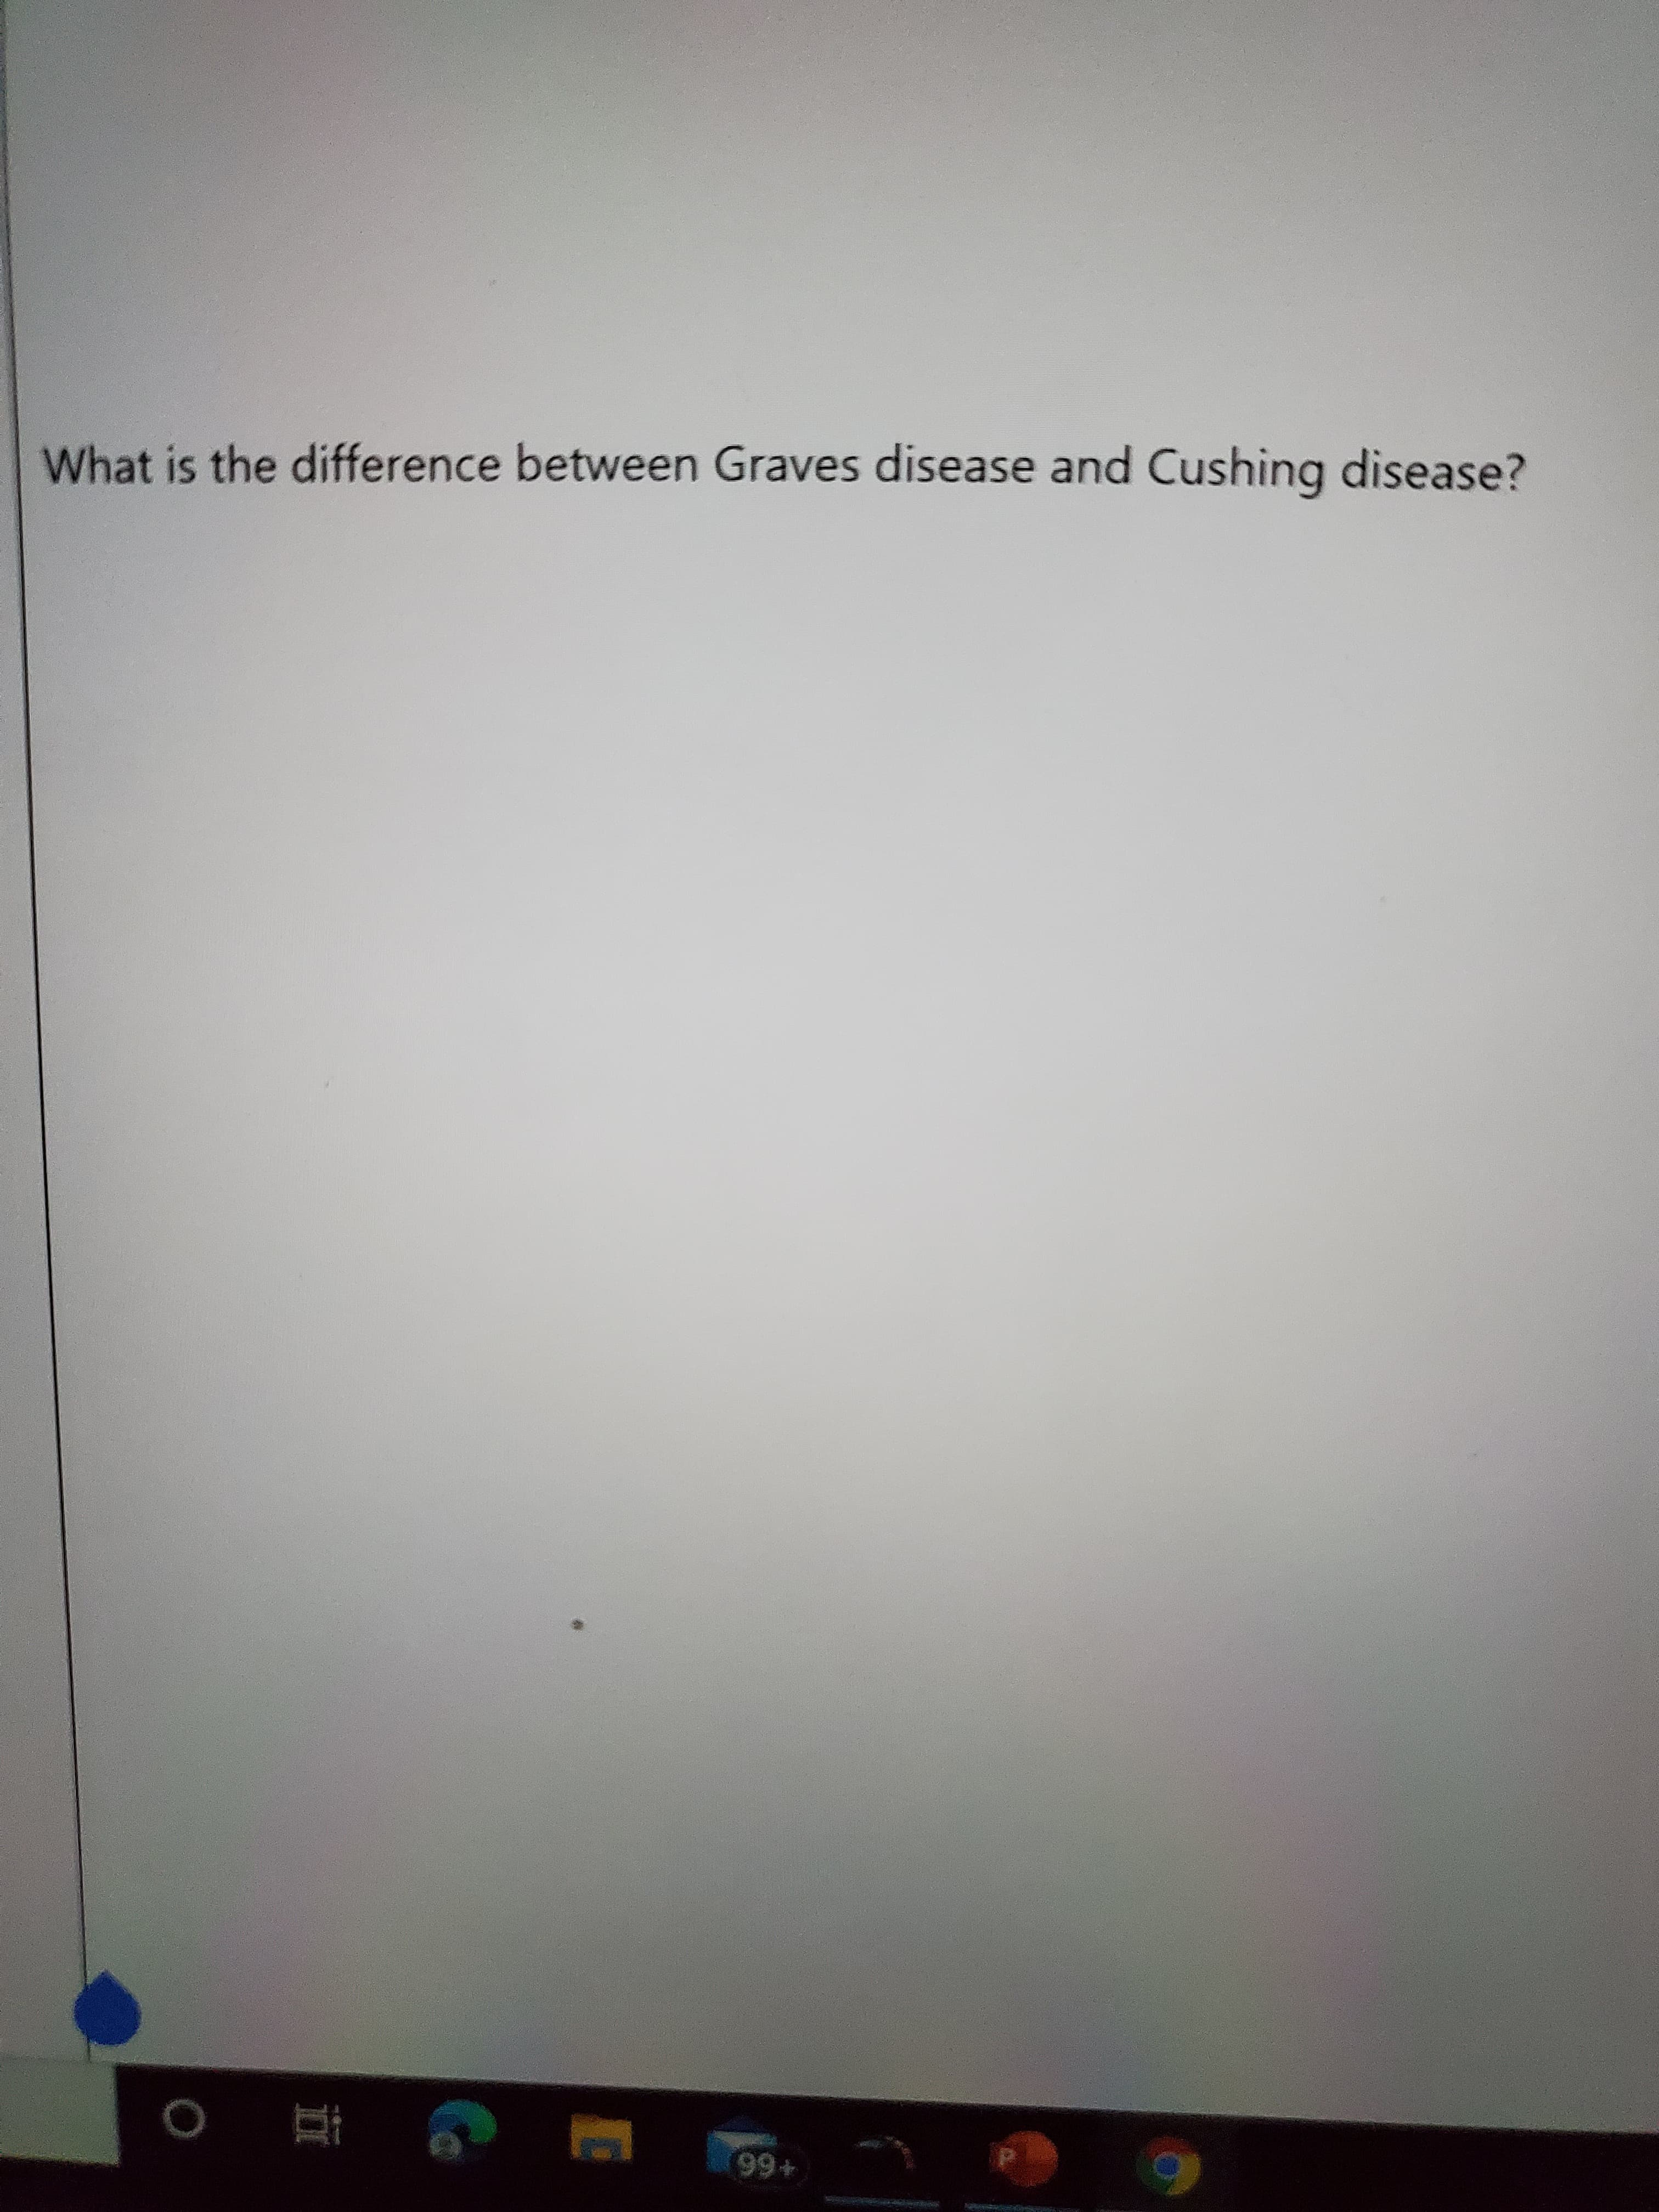 What is the difference between Graves disease and Cushing disease?
